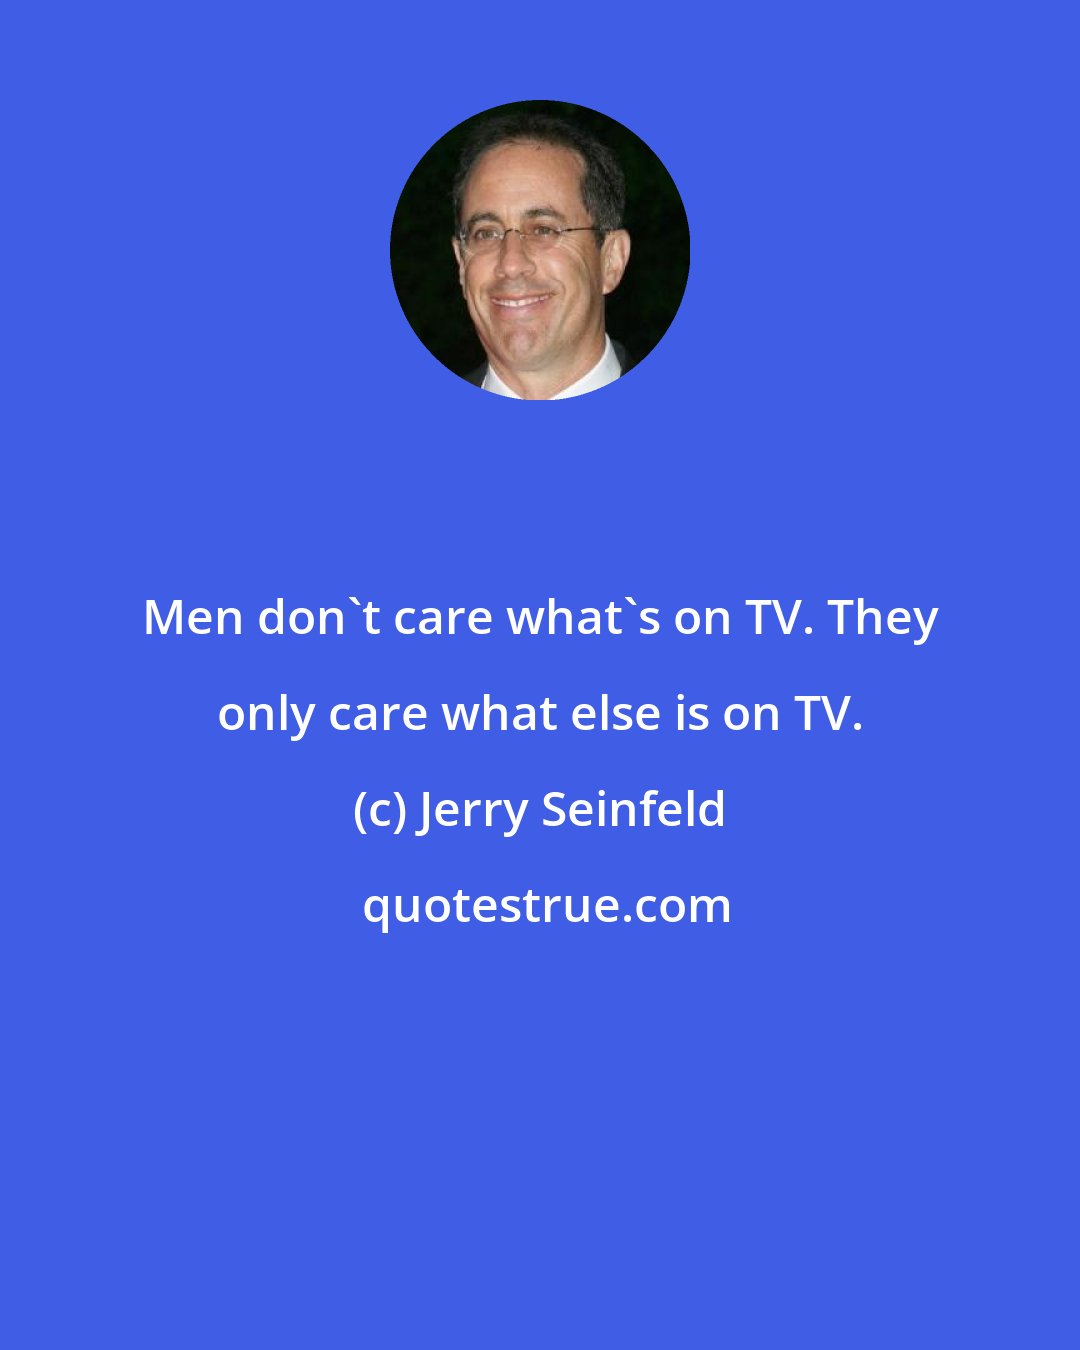 Jerry Seinfeld: Men don't care what's on TV. They only care what else is on TV.